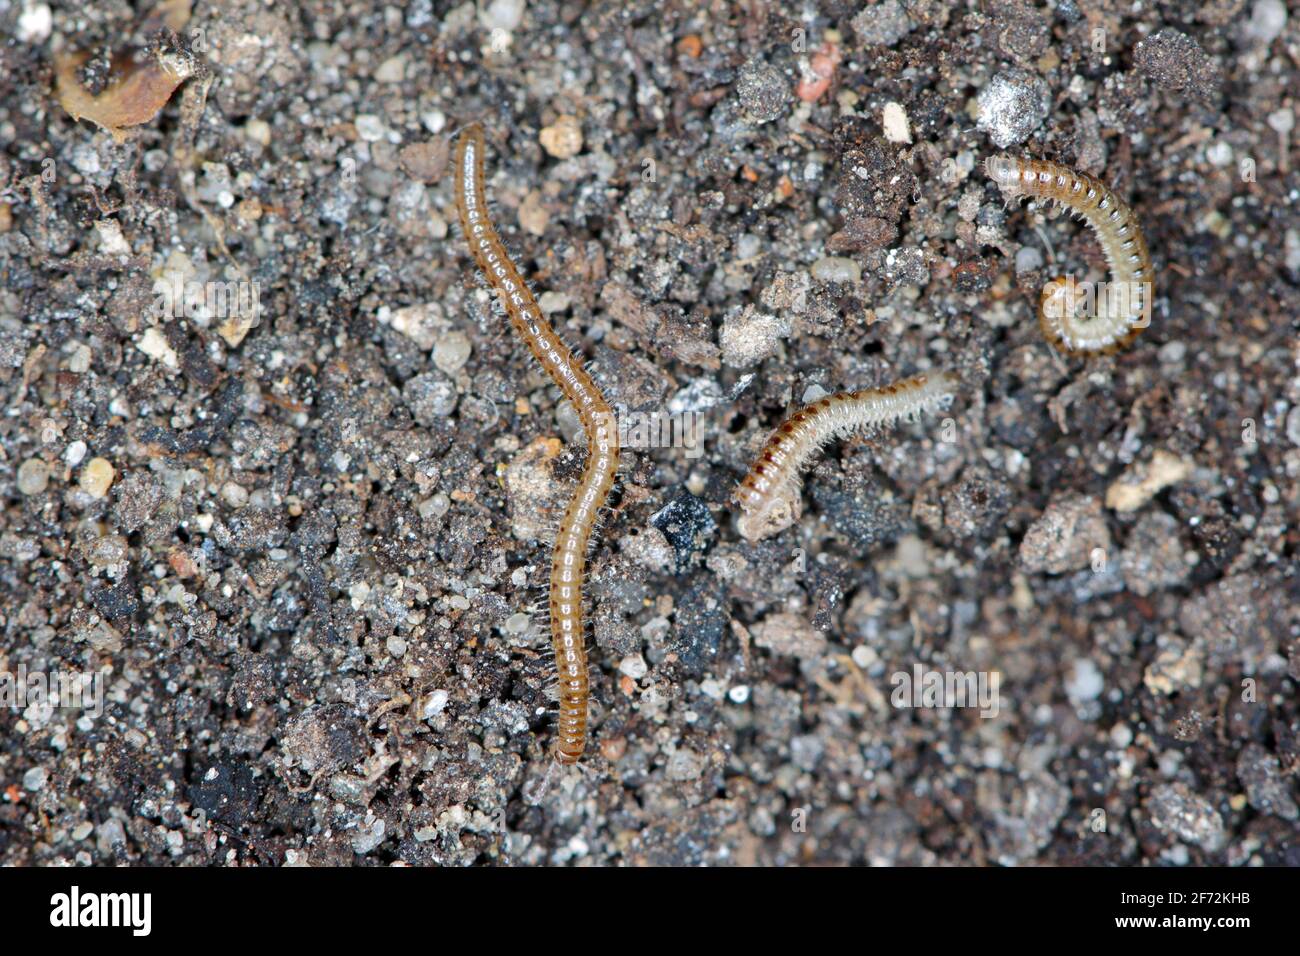 Blaniulus guttulatus, commonly known as the spotted snake millipede is a species of millipede in the family Blaniulidae. This worm living in the soil. Stock Photo